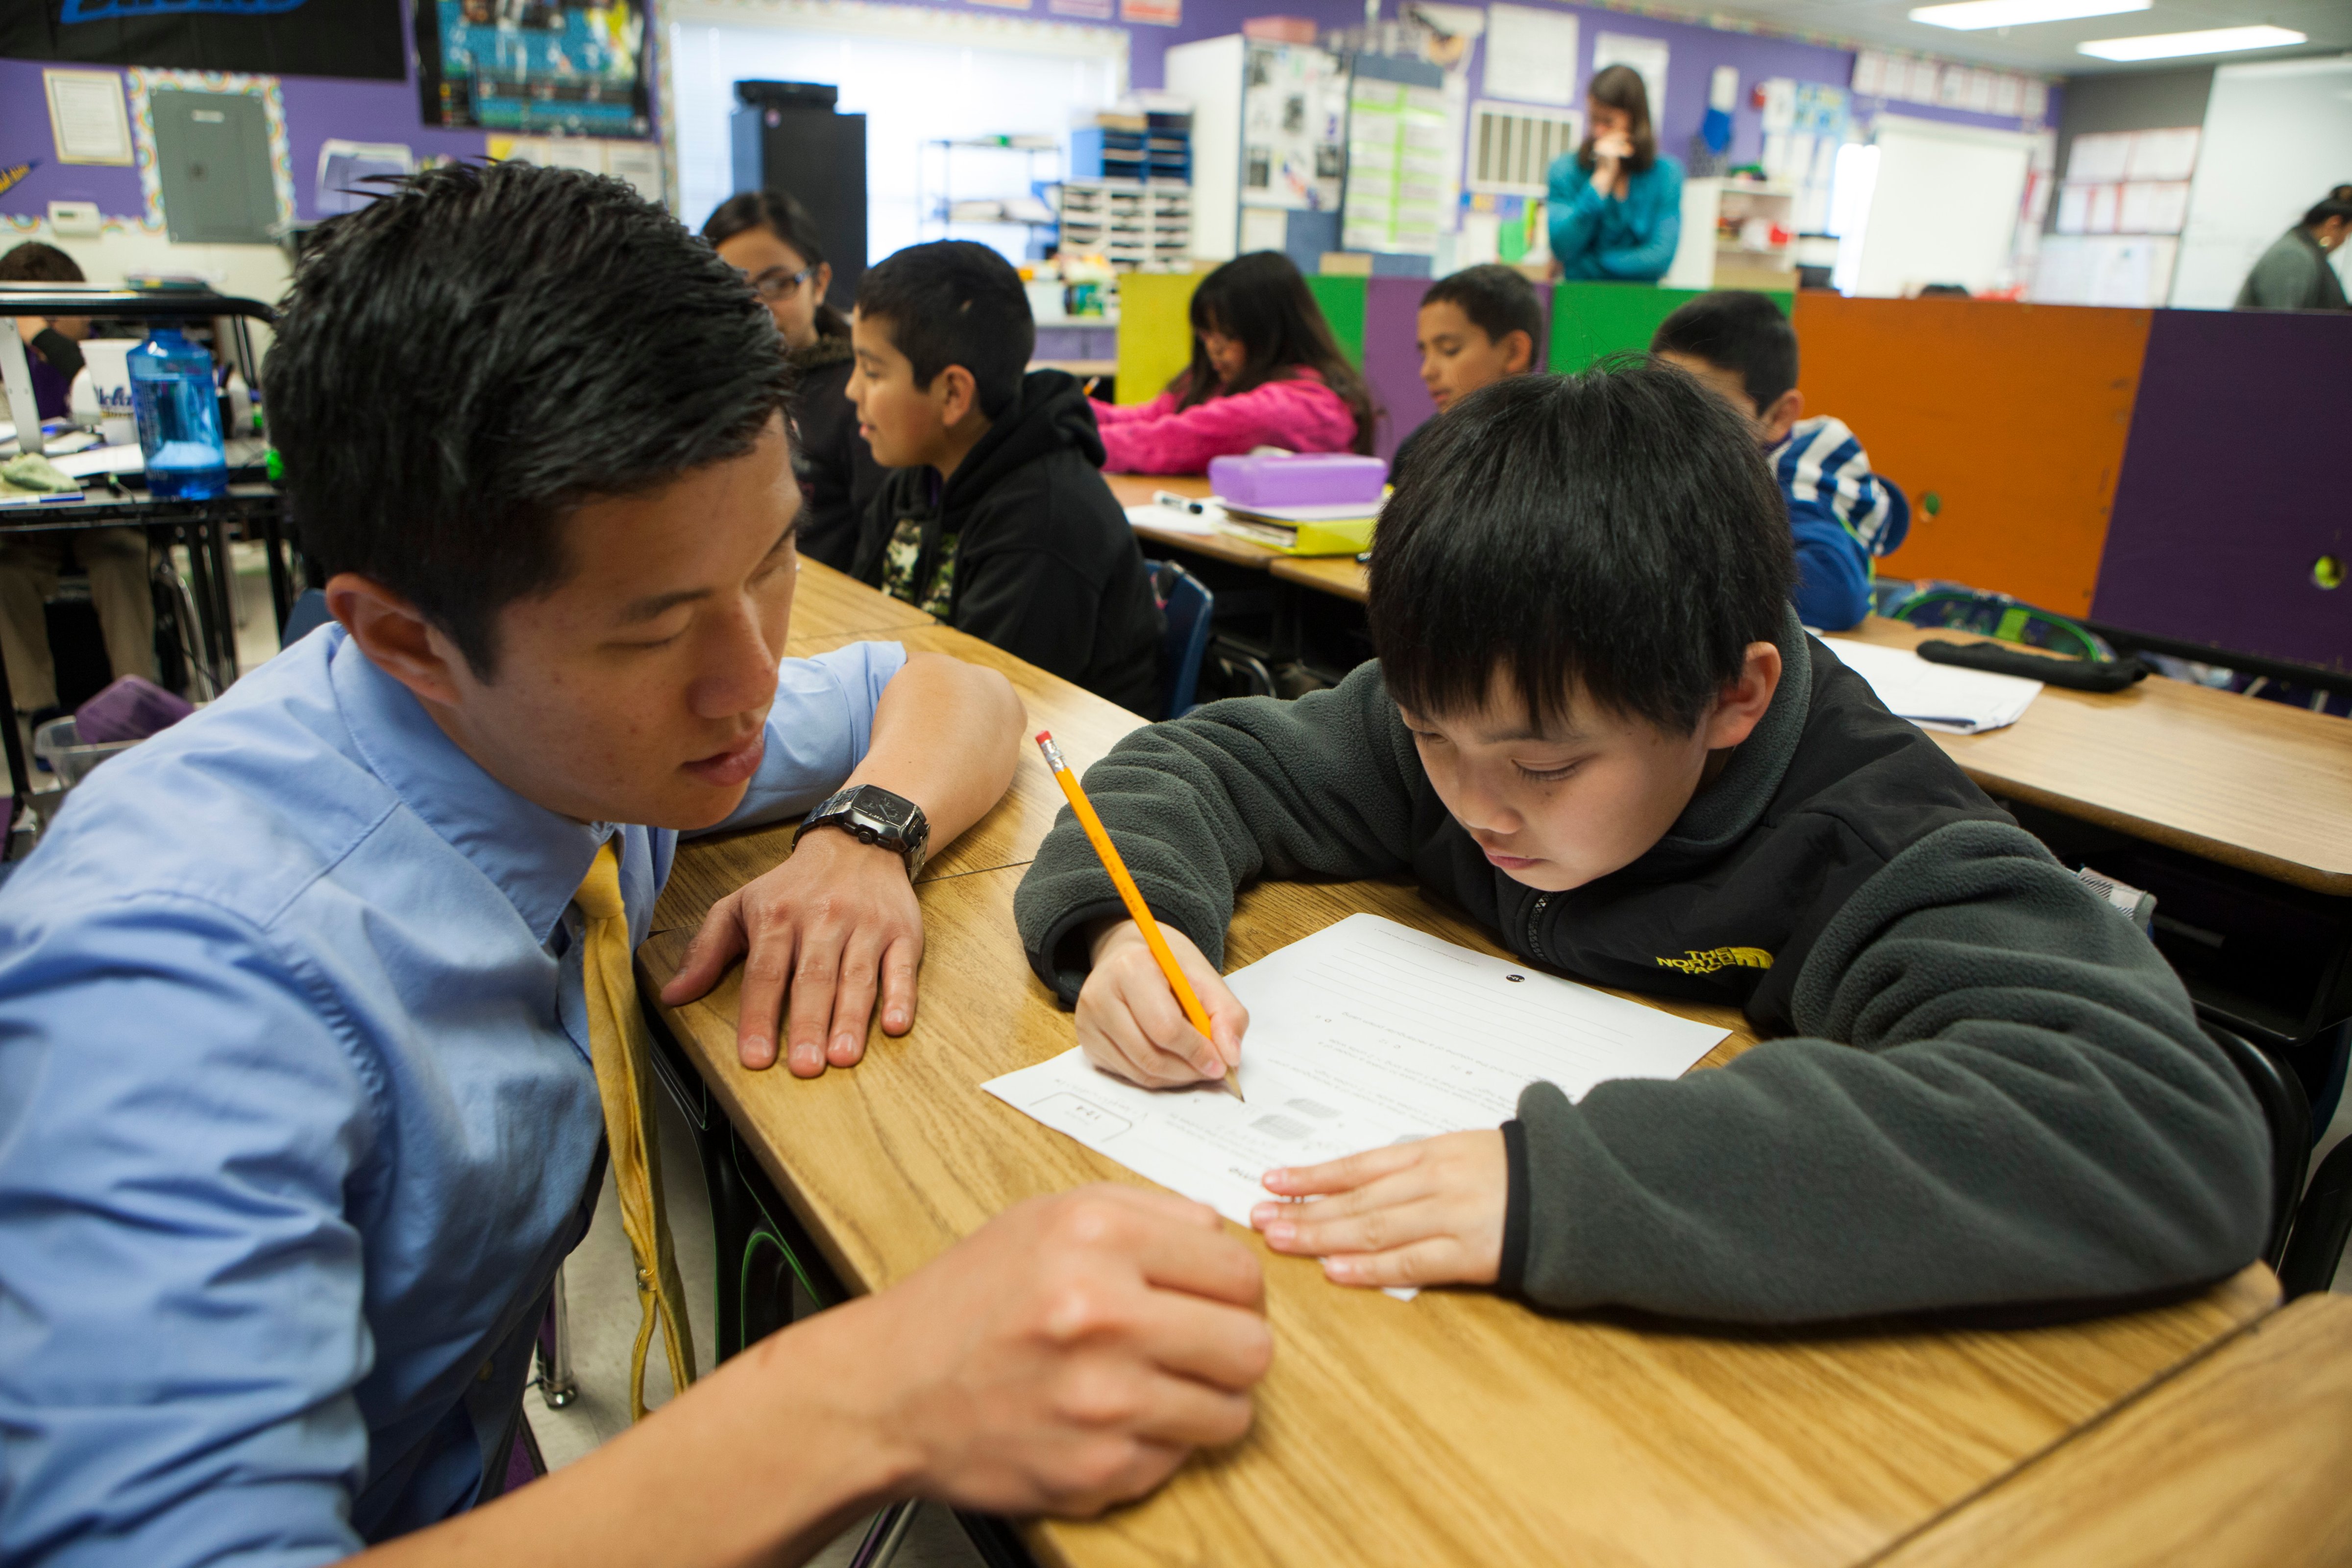 Fifth grade science and math teacher Stephen Pham helps a student at Rocketship SI Se Puede, a charter, public elementary school, on Feb. 18, 2014 in San Jose, California. (Melanie Stetson Freeman—The Christian Science Monitor/Getty Images)